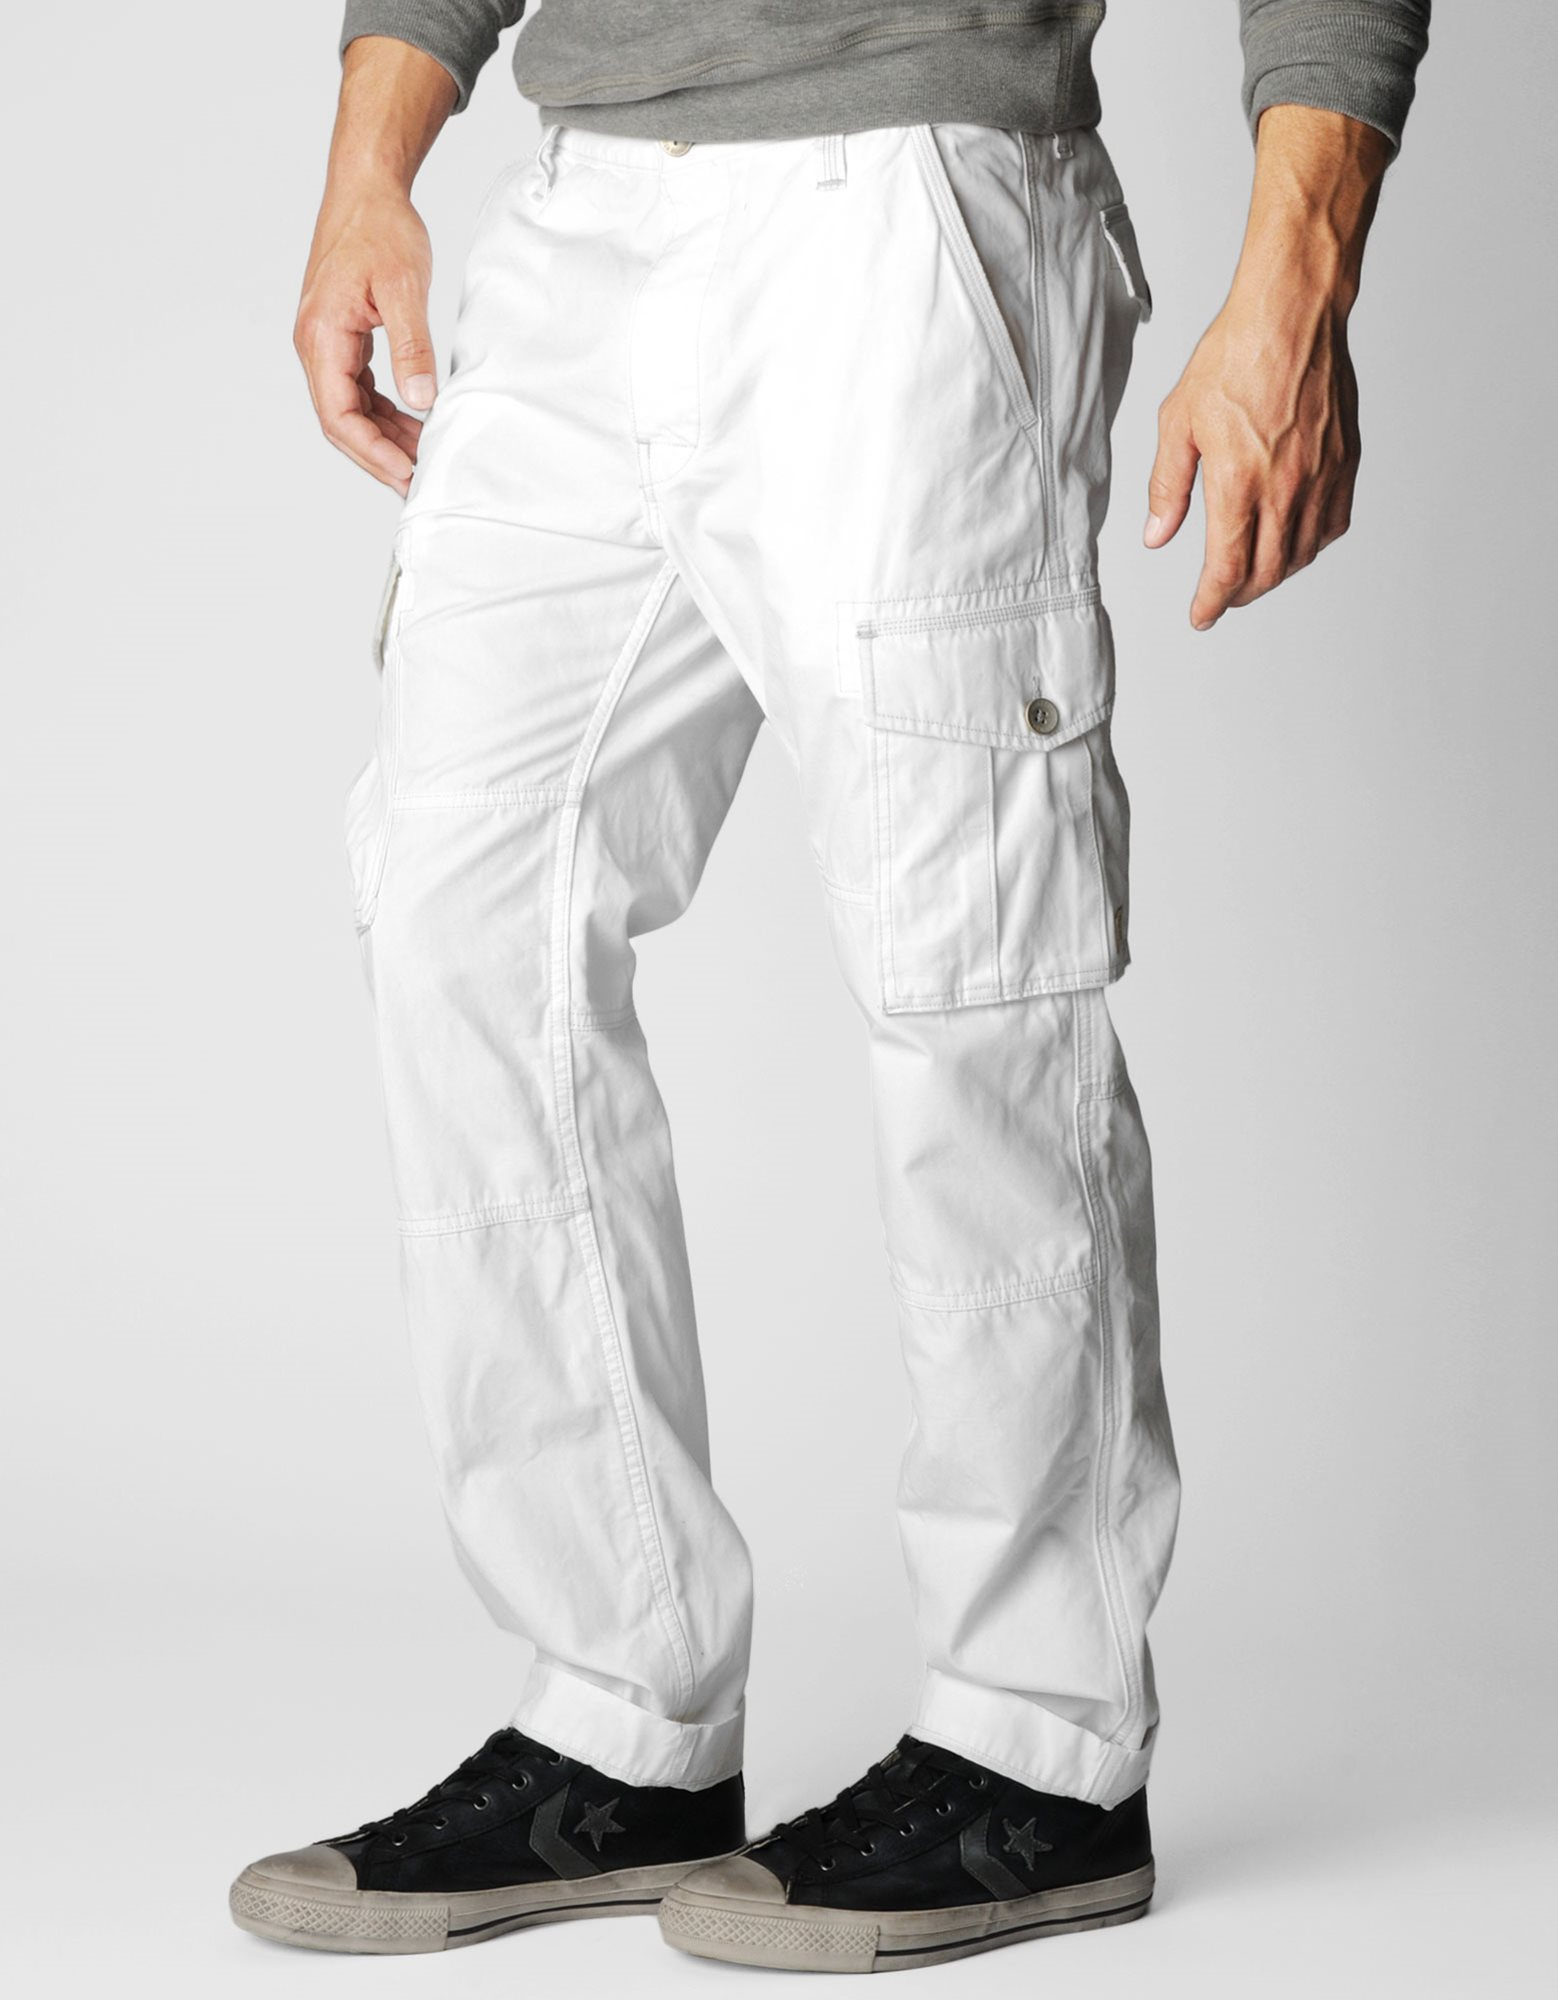 True Religion Special Ops Mens Cargo Pant in White for Men